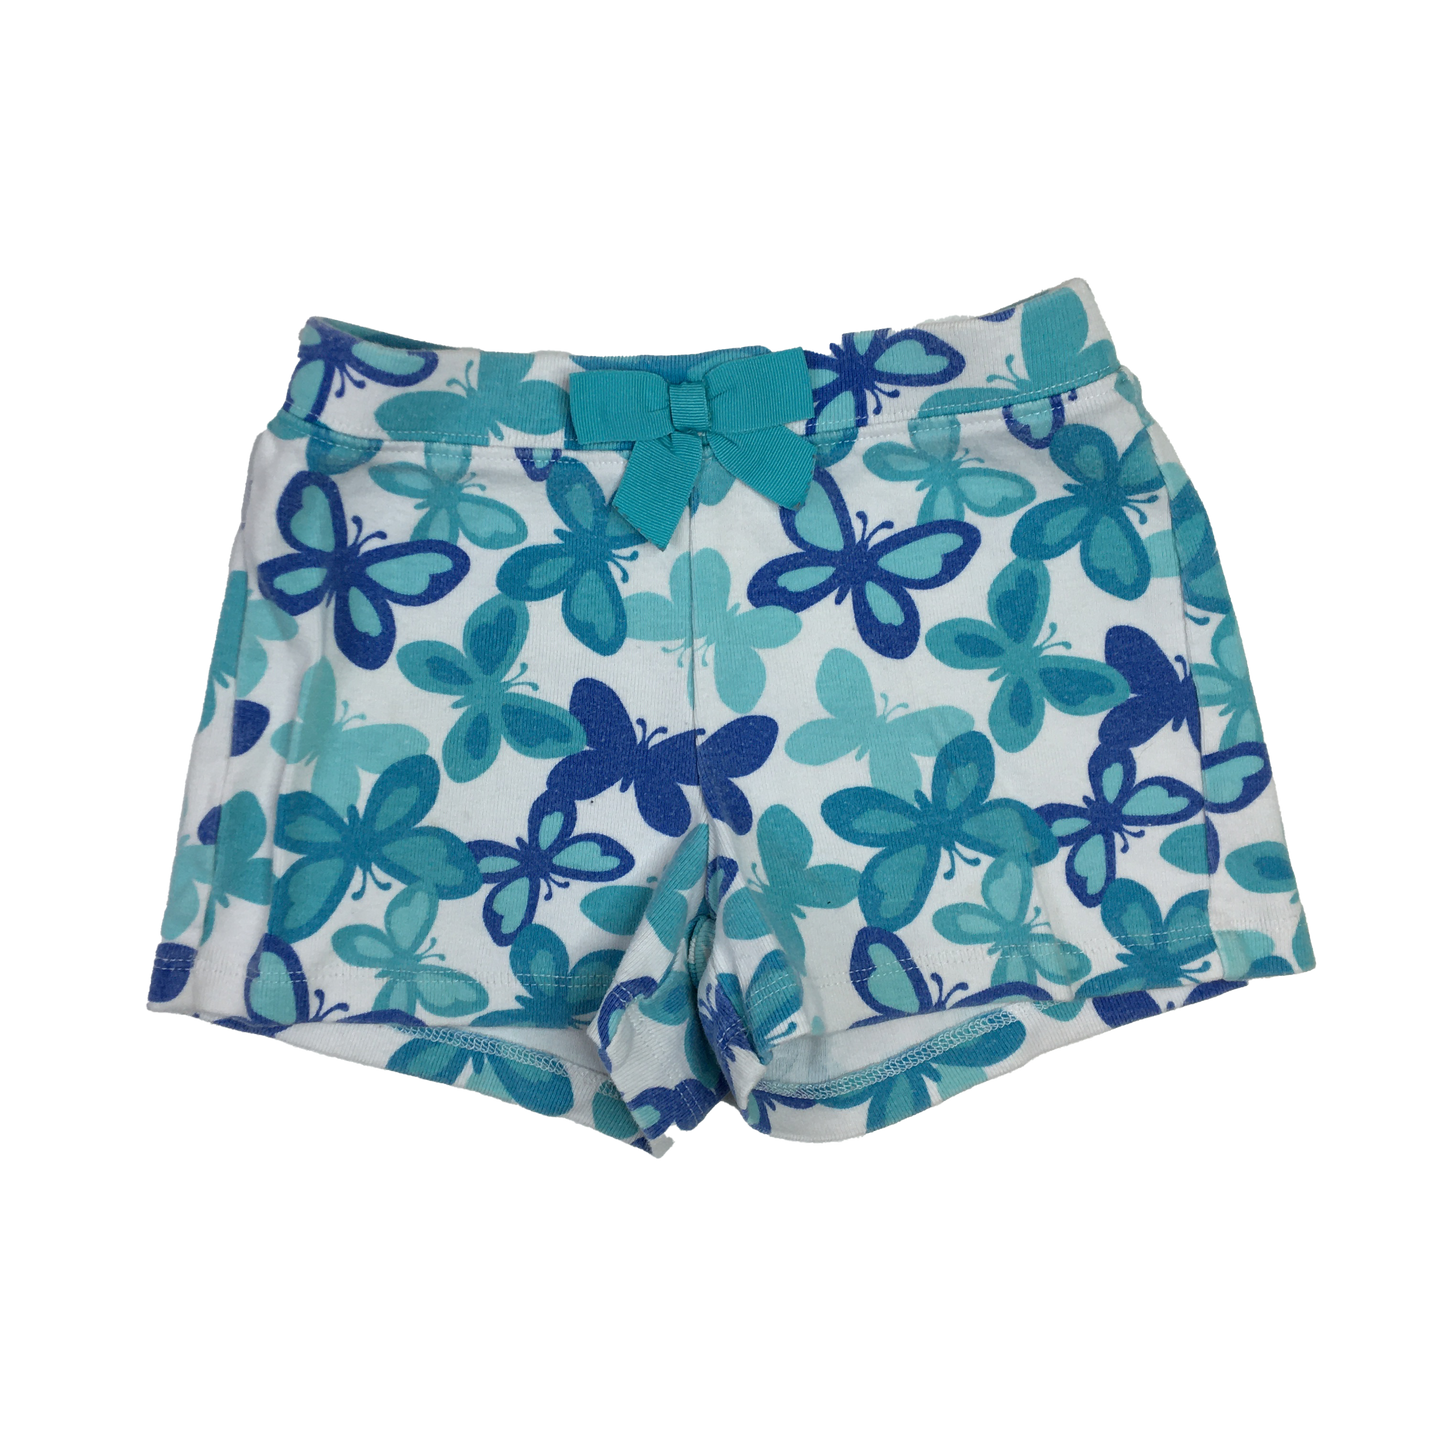 Gymboree White Pull-On Shorts with Blue Butterflies 3T